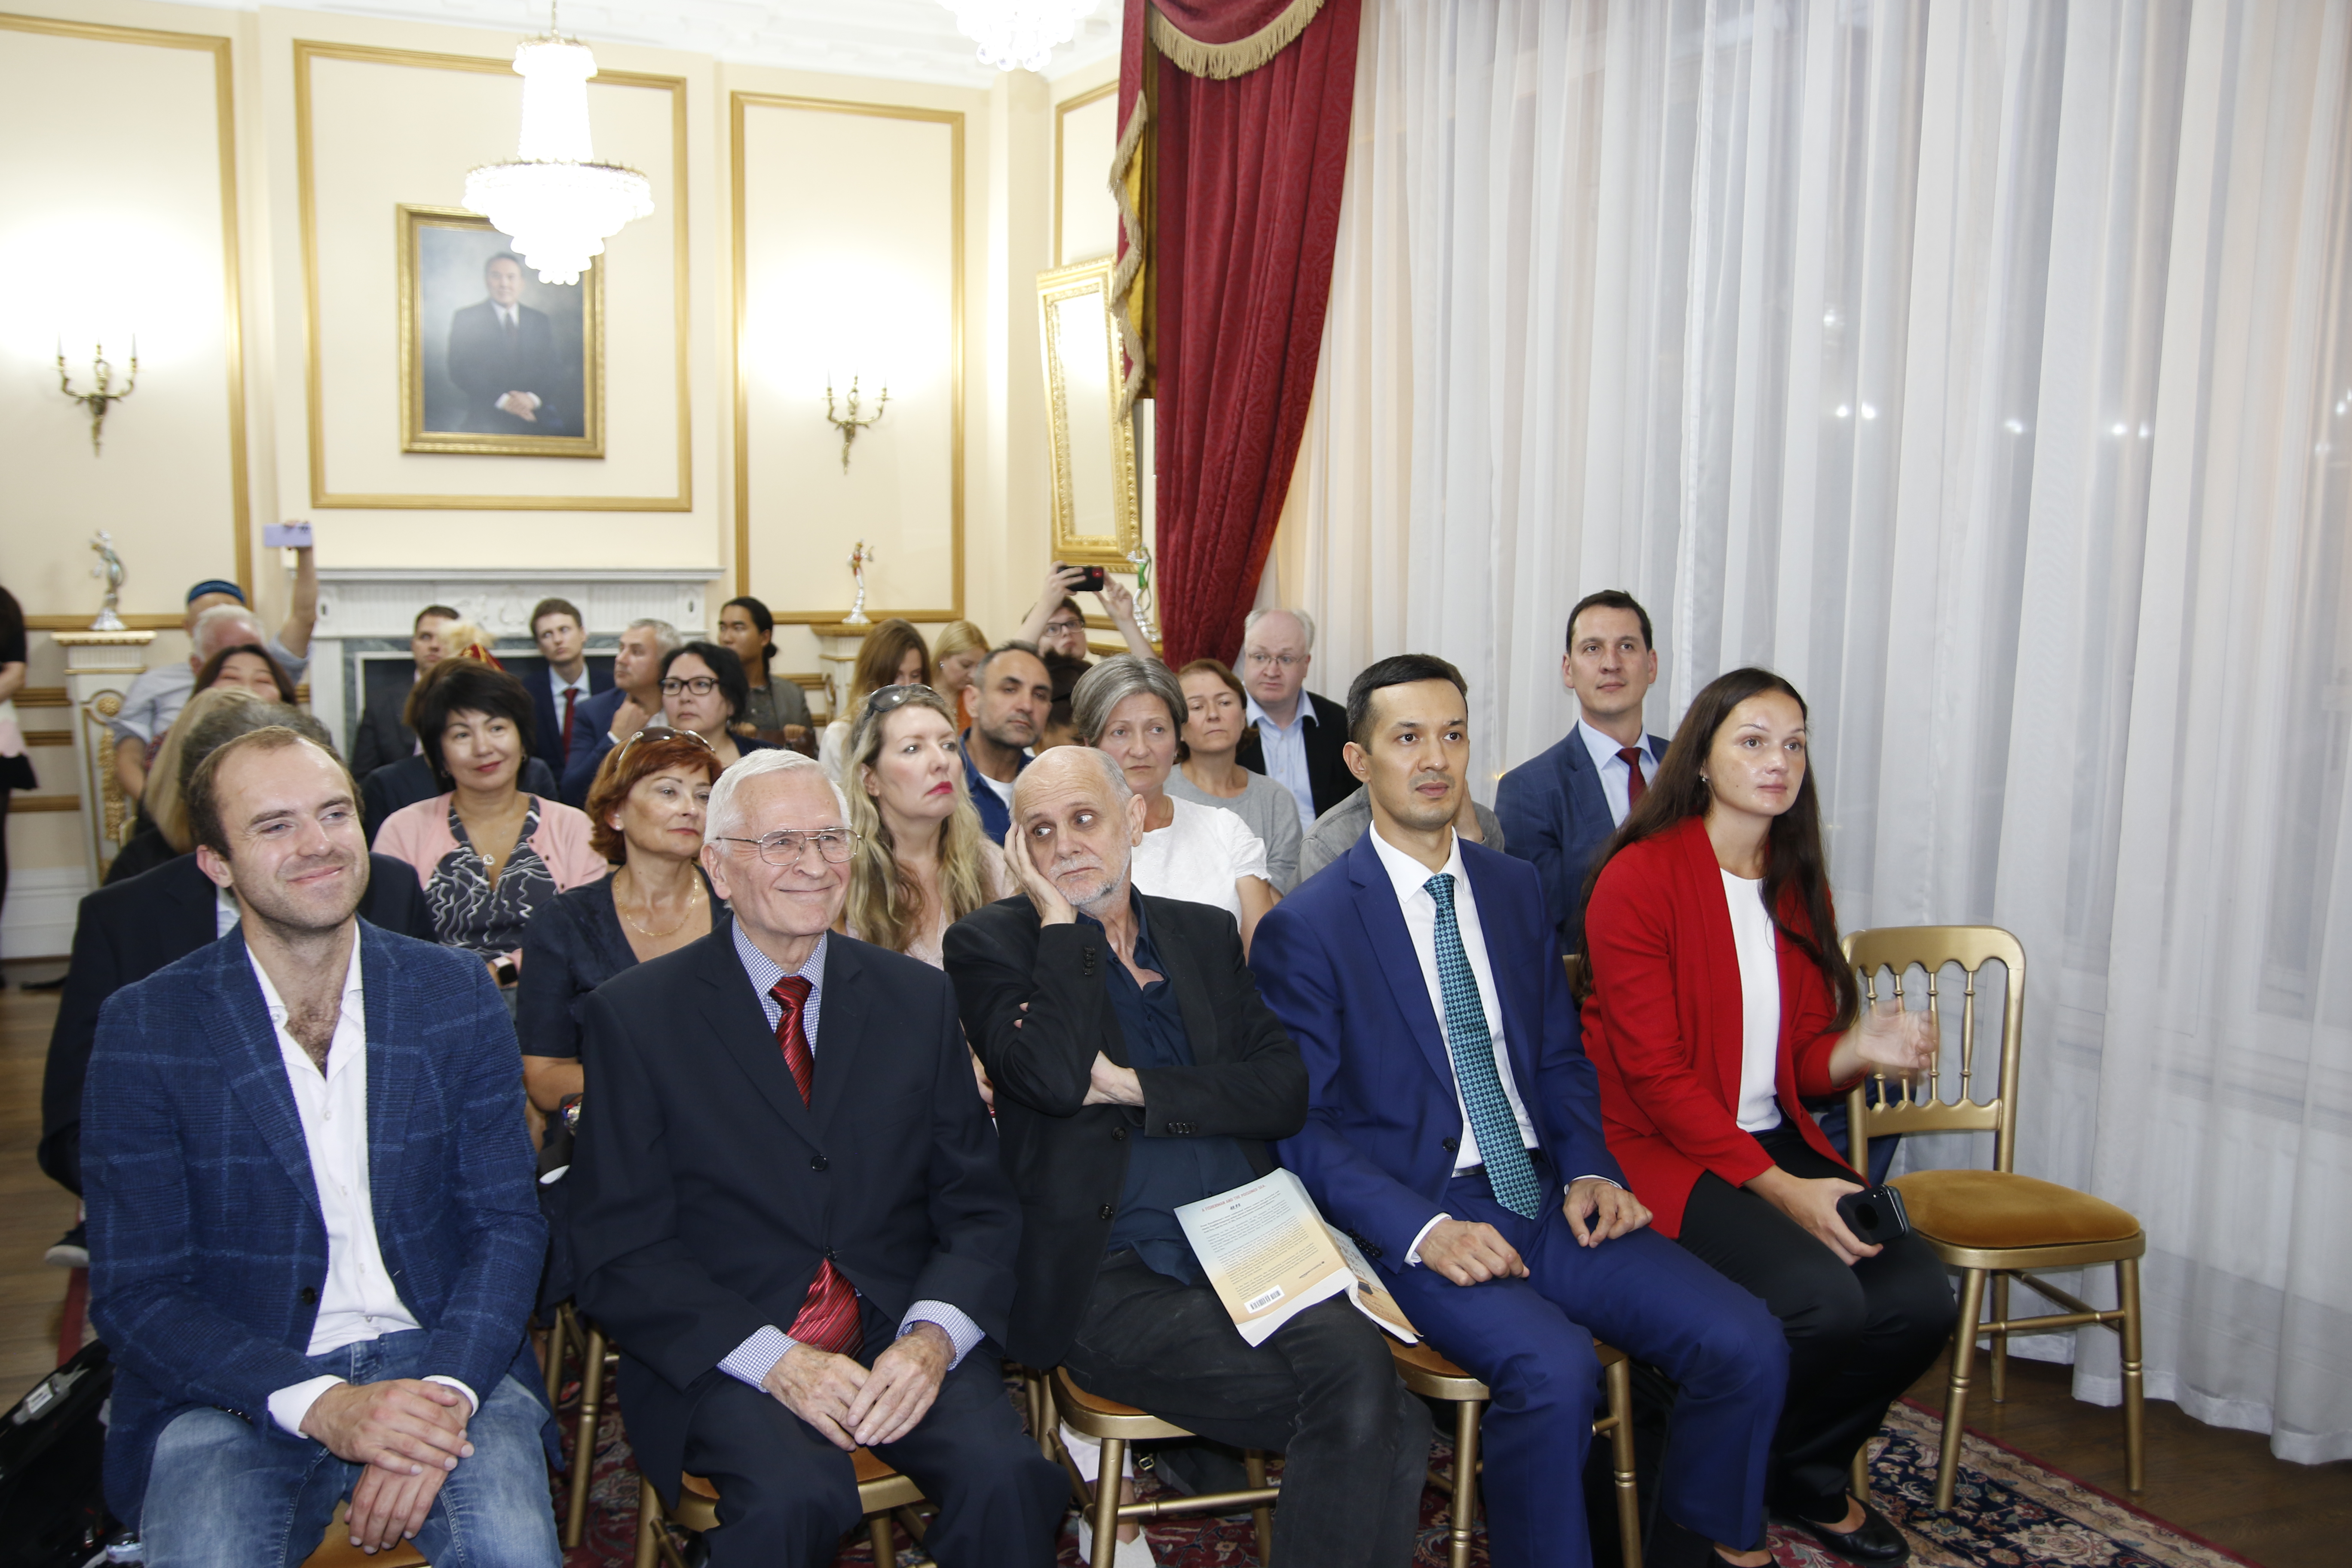 A conference on the occasion of the 150th anniversary of Akhmet Baitursynov was held in London